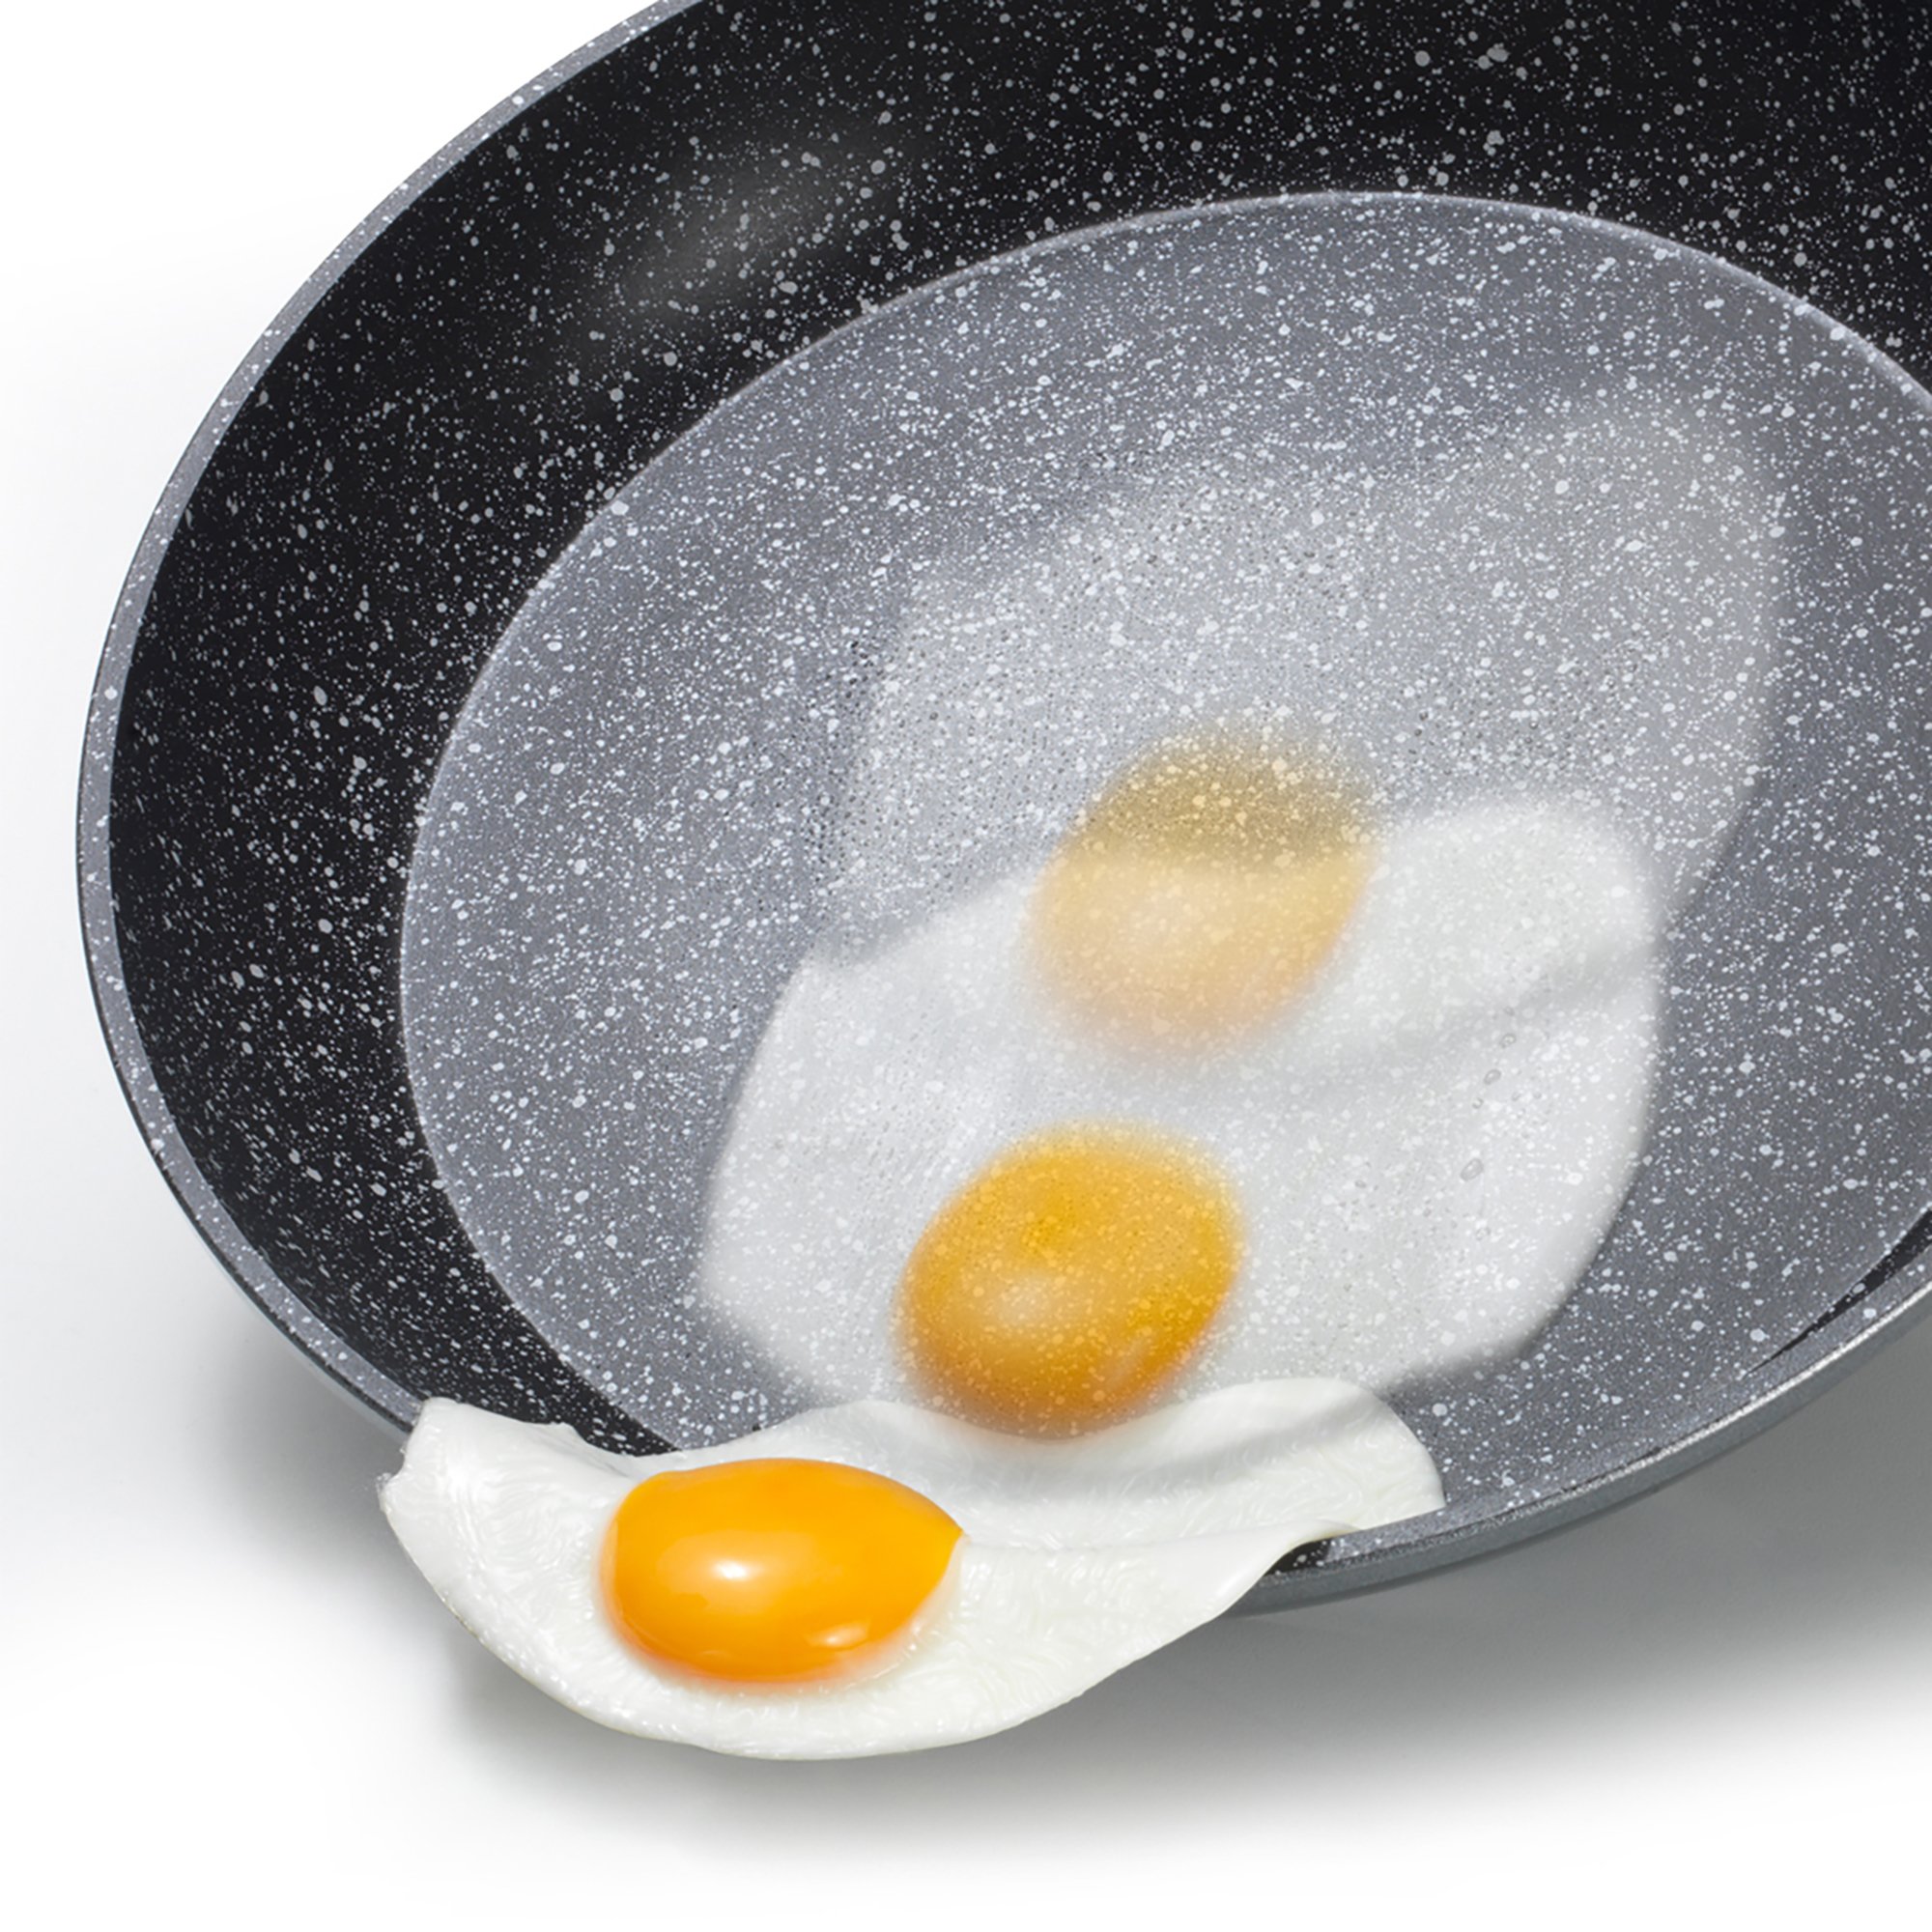 STONELINE® Frying Pan 24 cm with Removable Divider Separator, with Lid